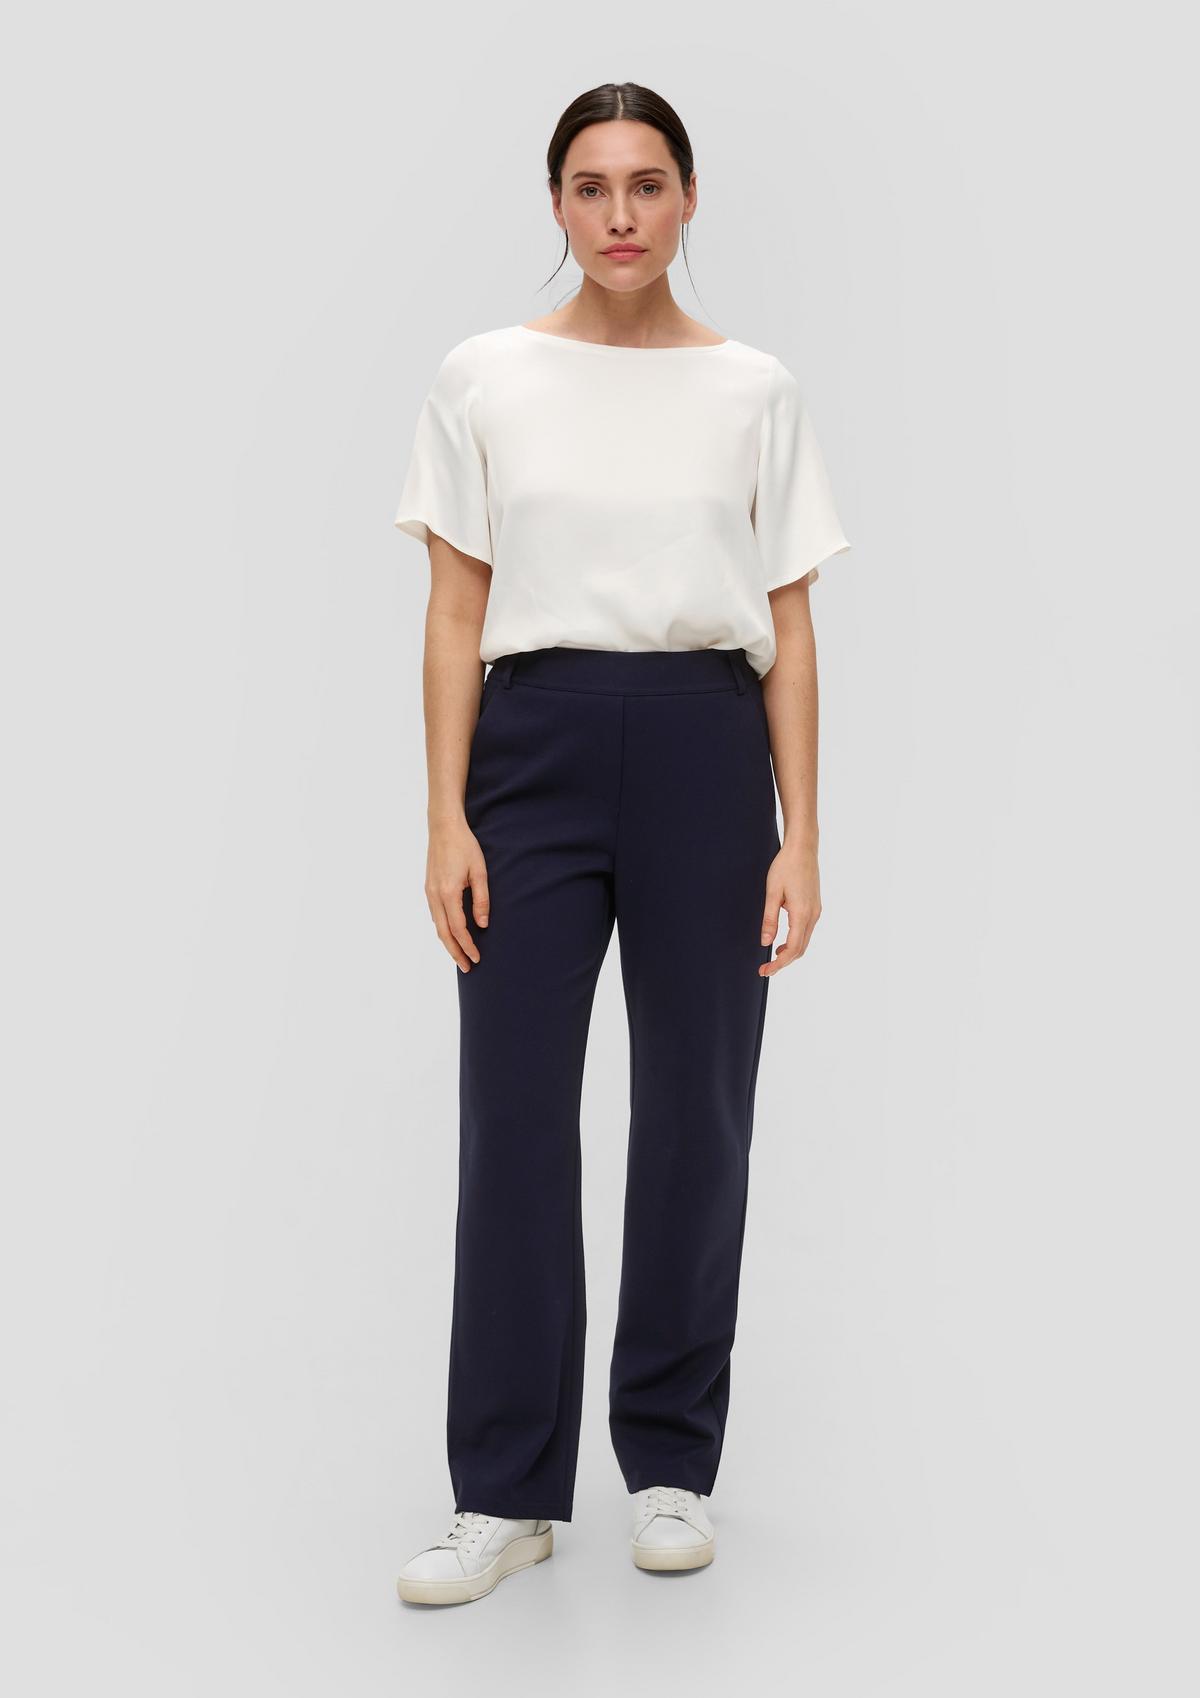 Viscose blend trousers with a straight leg